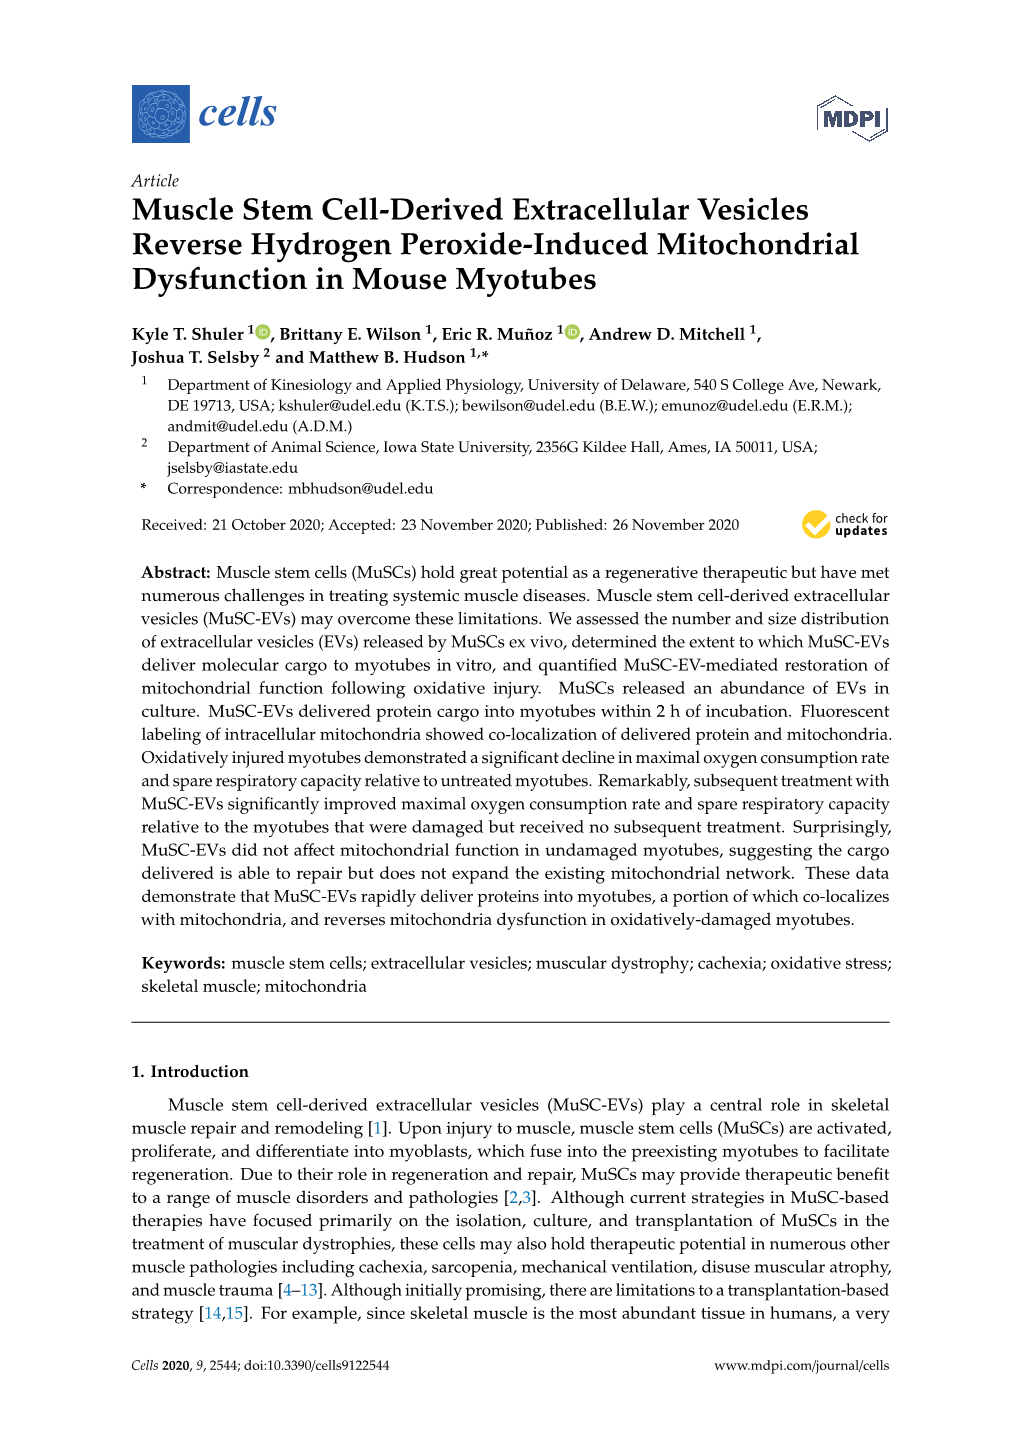 Muscle Stem Cell-Derived Extracellular Vesicles Reverse Hydrogen Peroxide-Induced Mitochondrial Dysfunction in Mouse Myotubes